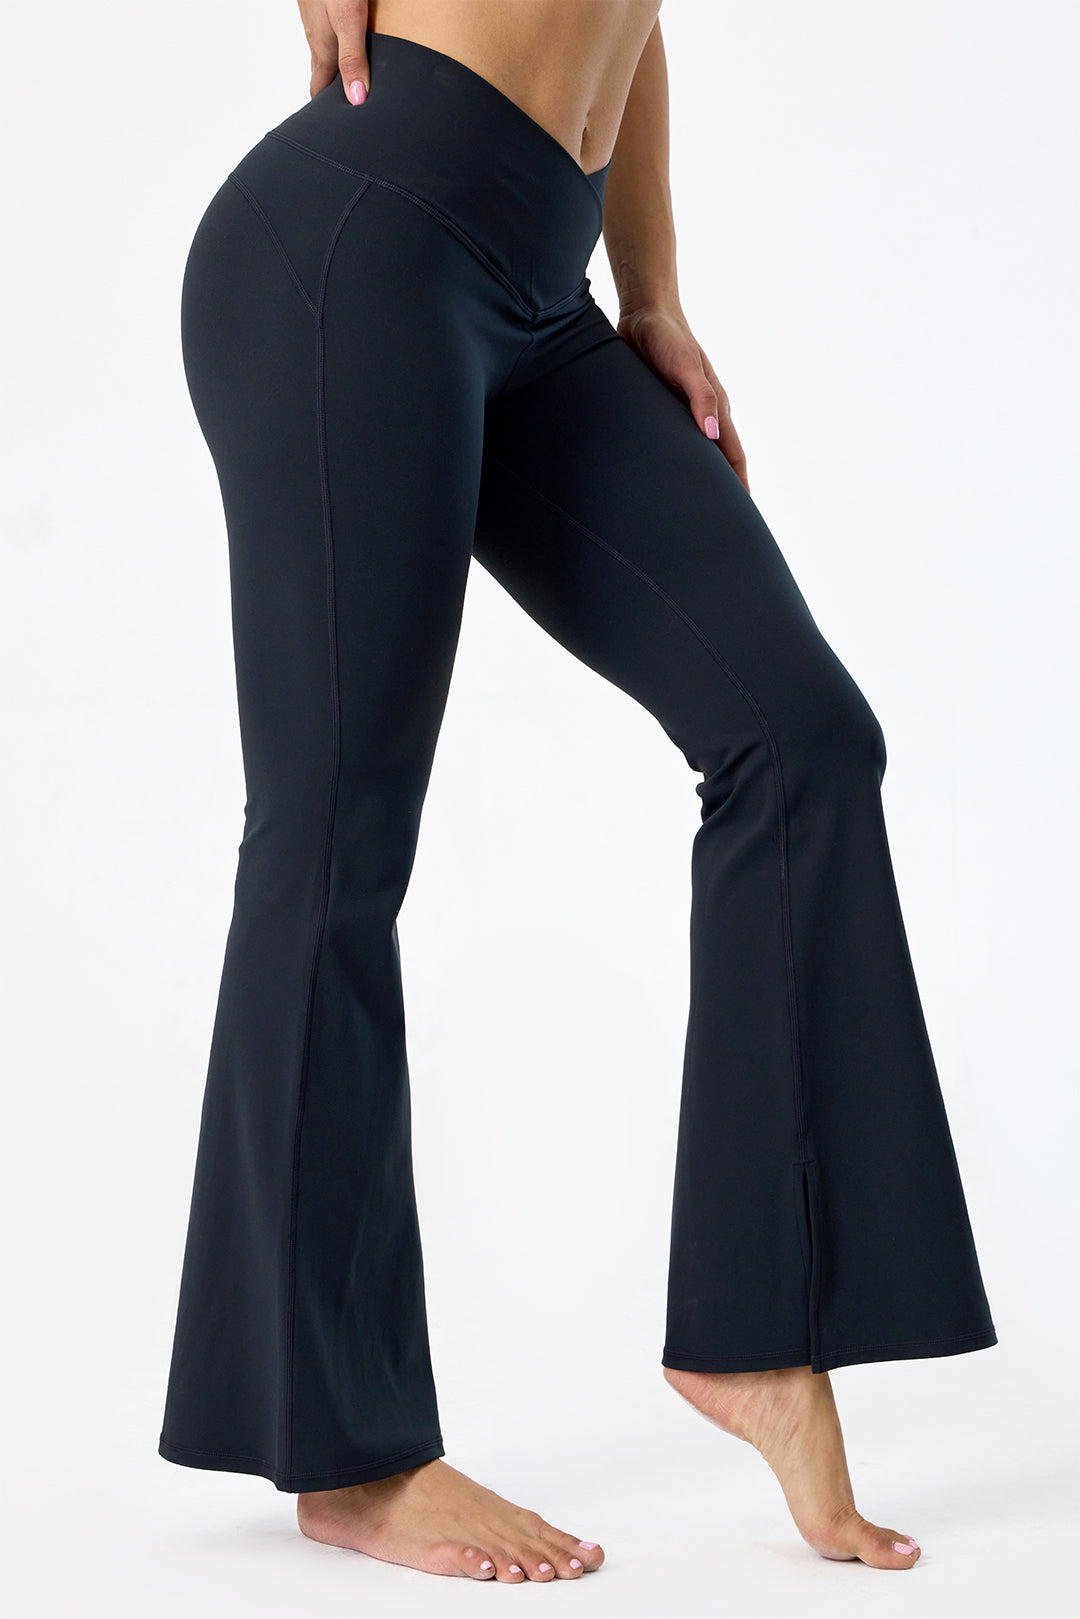 TOWED22 Women's Flare Leggings with Pockets-Crossover High Waisted